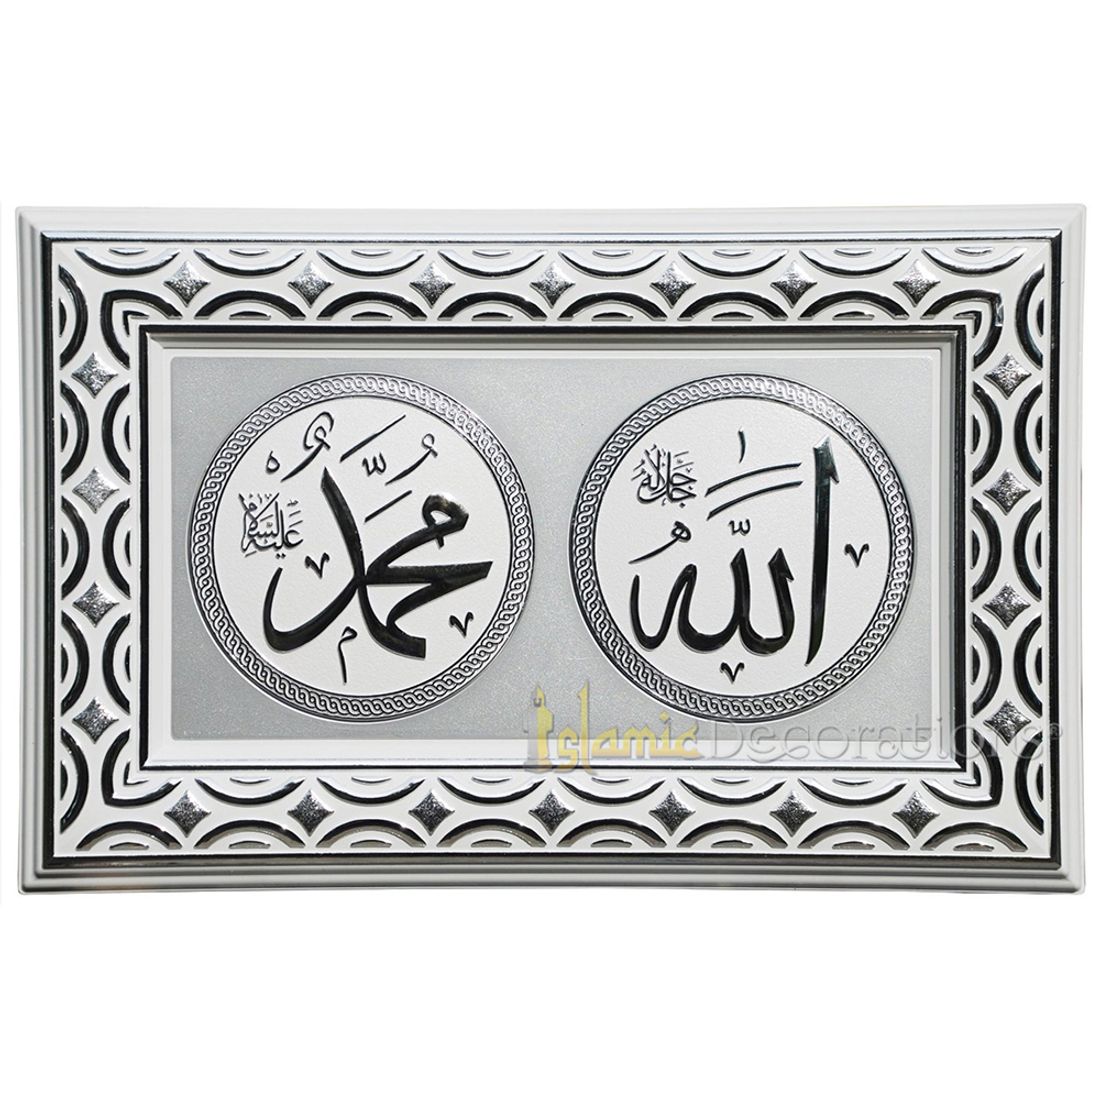 Silver & White Rectangular molded 8-5/8 x 13-3/8 in Allah Muhammad Display Plaque – Islamic Calligraphy Art